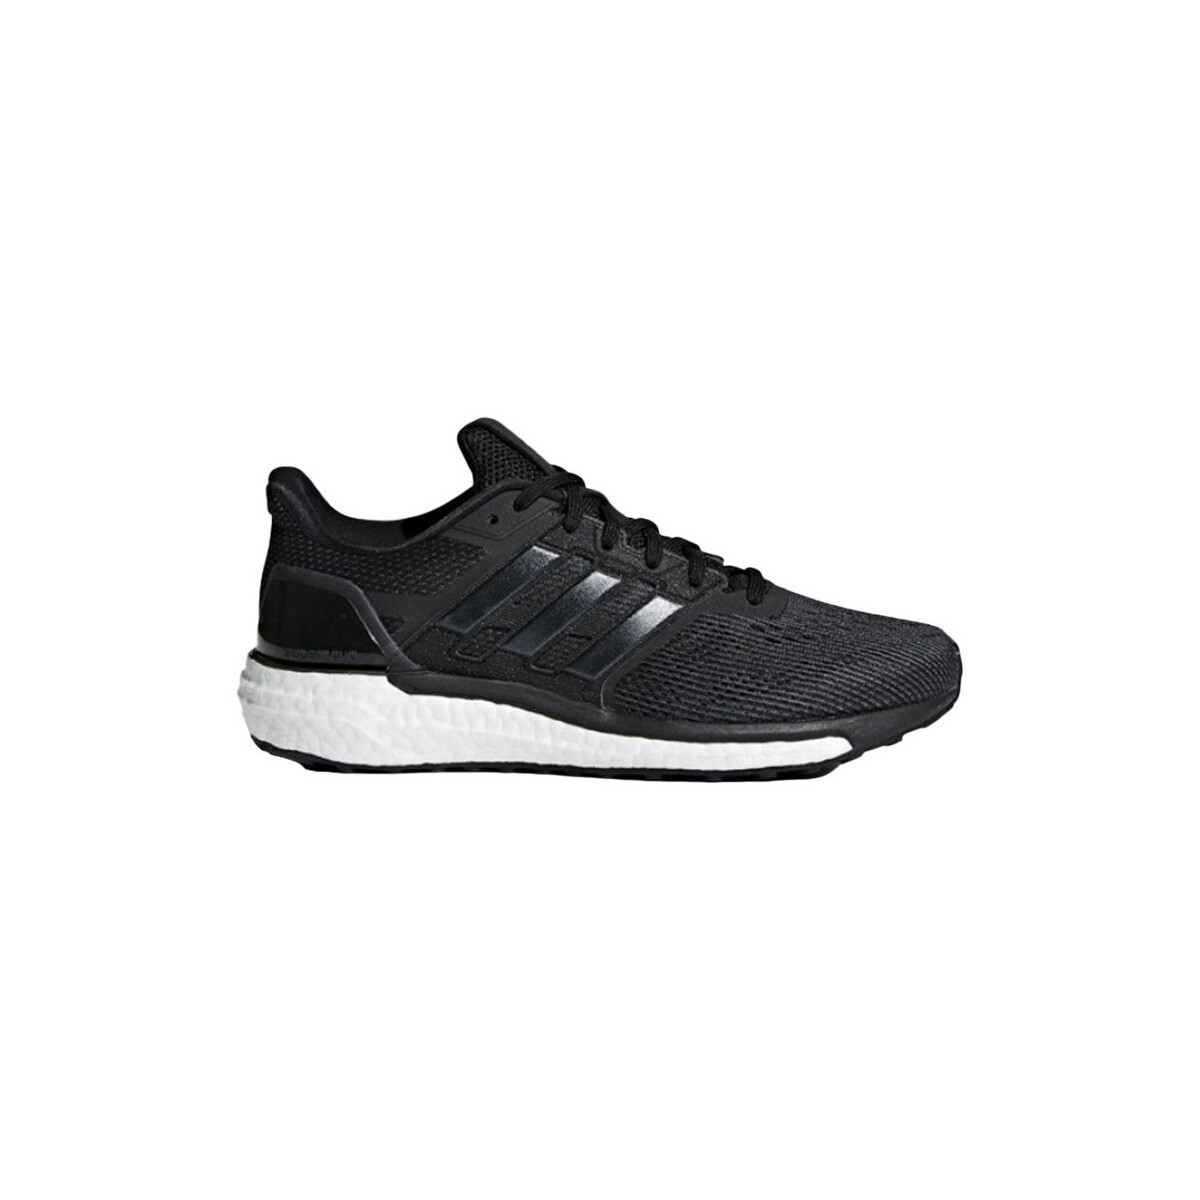 Chaussures Femme Running / trail adidas Originals CHAUSSURES RUNNING SUPERNOVA - NOIESS/NOIESS/NOIESS - 41 1/3 Multicolore